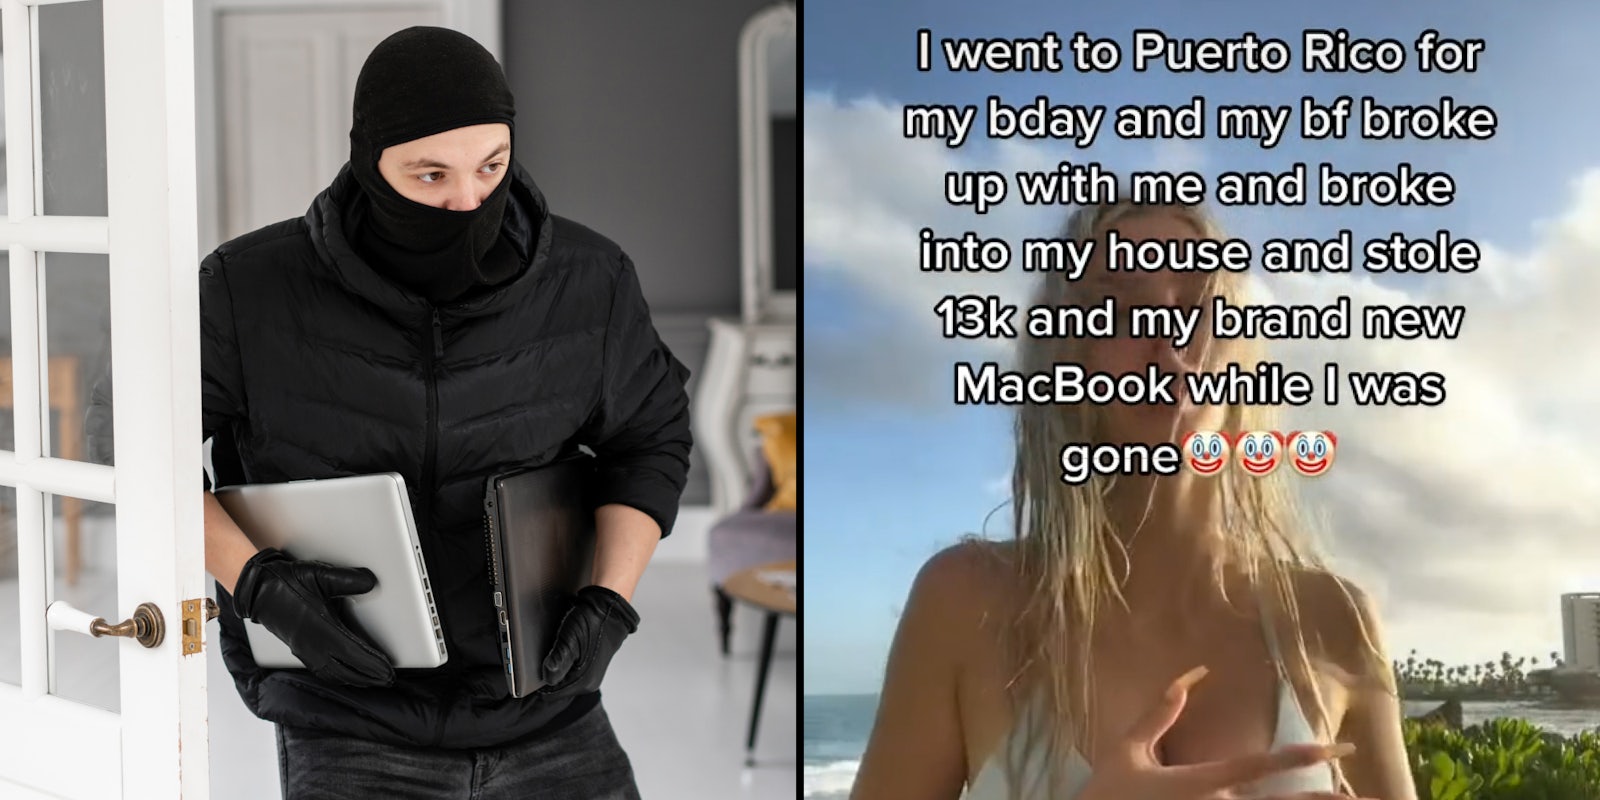 robber stealing expensive tech (l) Woman on beach caption 'I went to Puerto Rico for my bday and my bf broke up with me and broke into my house and stole 13k and my brand new MacBook while I was gone' (r)